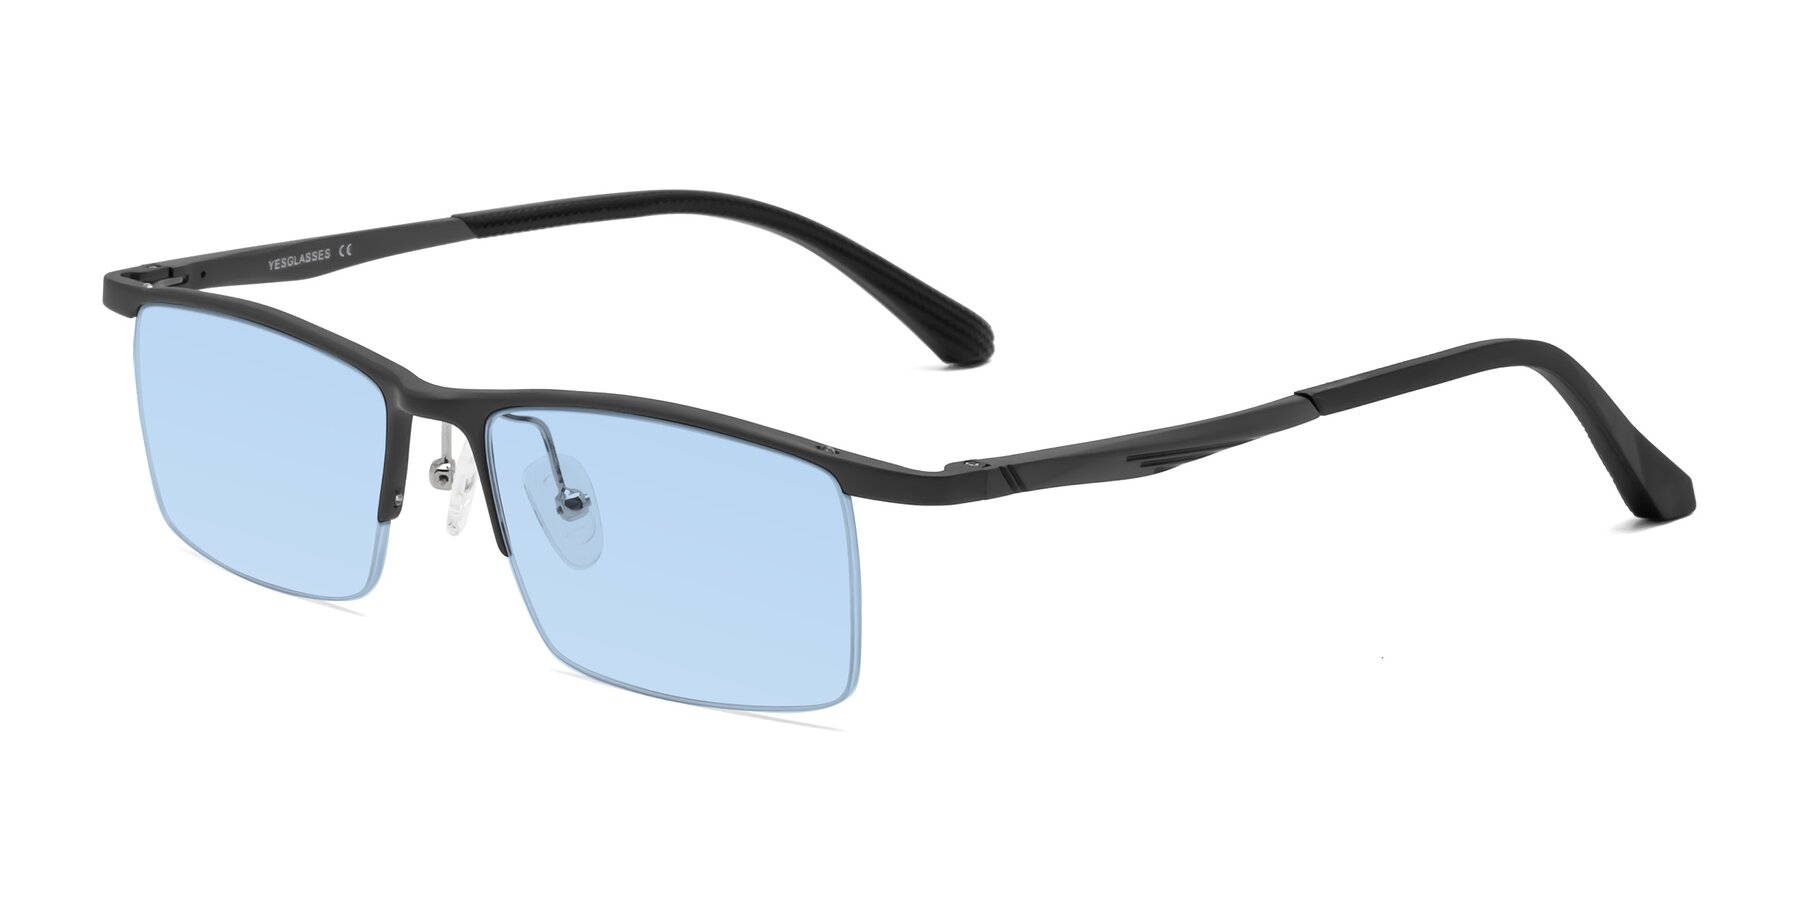 Angle of CX6236 in Gunmetal with Light Blue Tinted Lenses